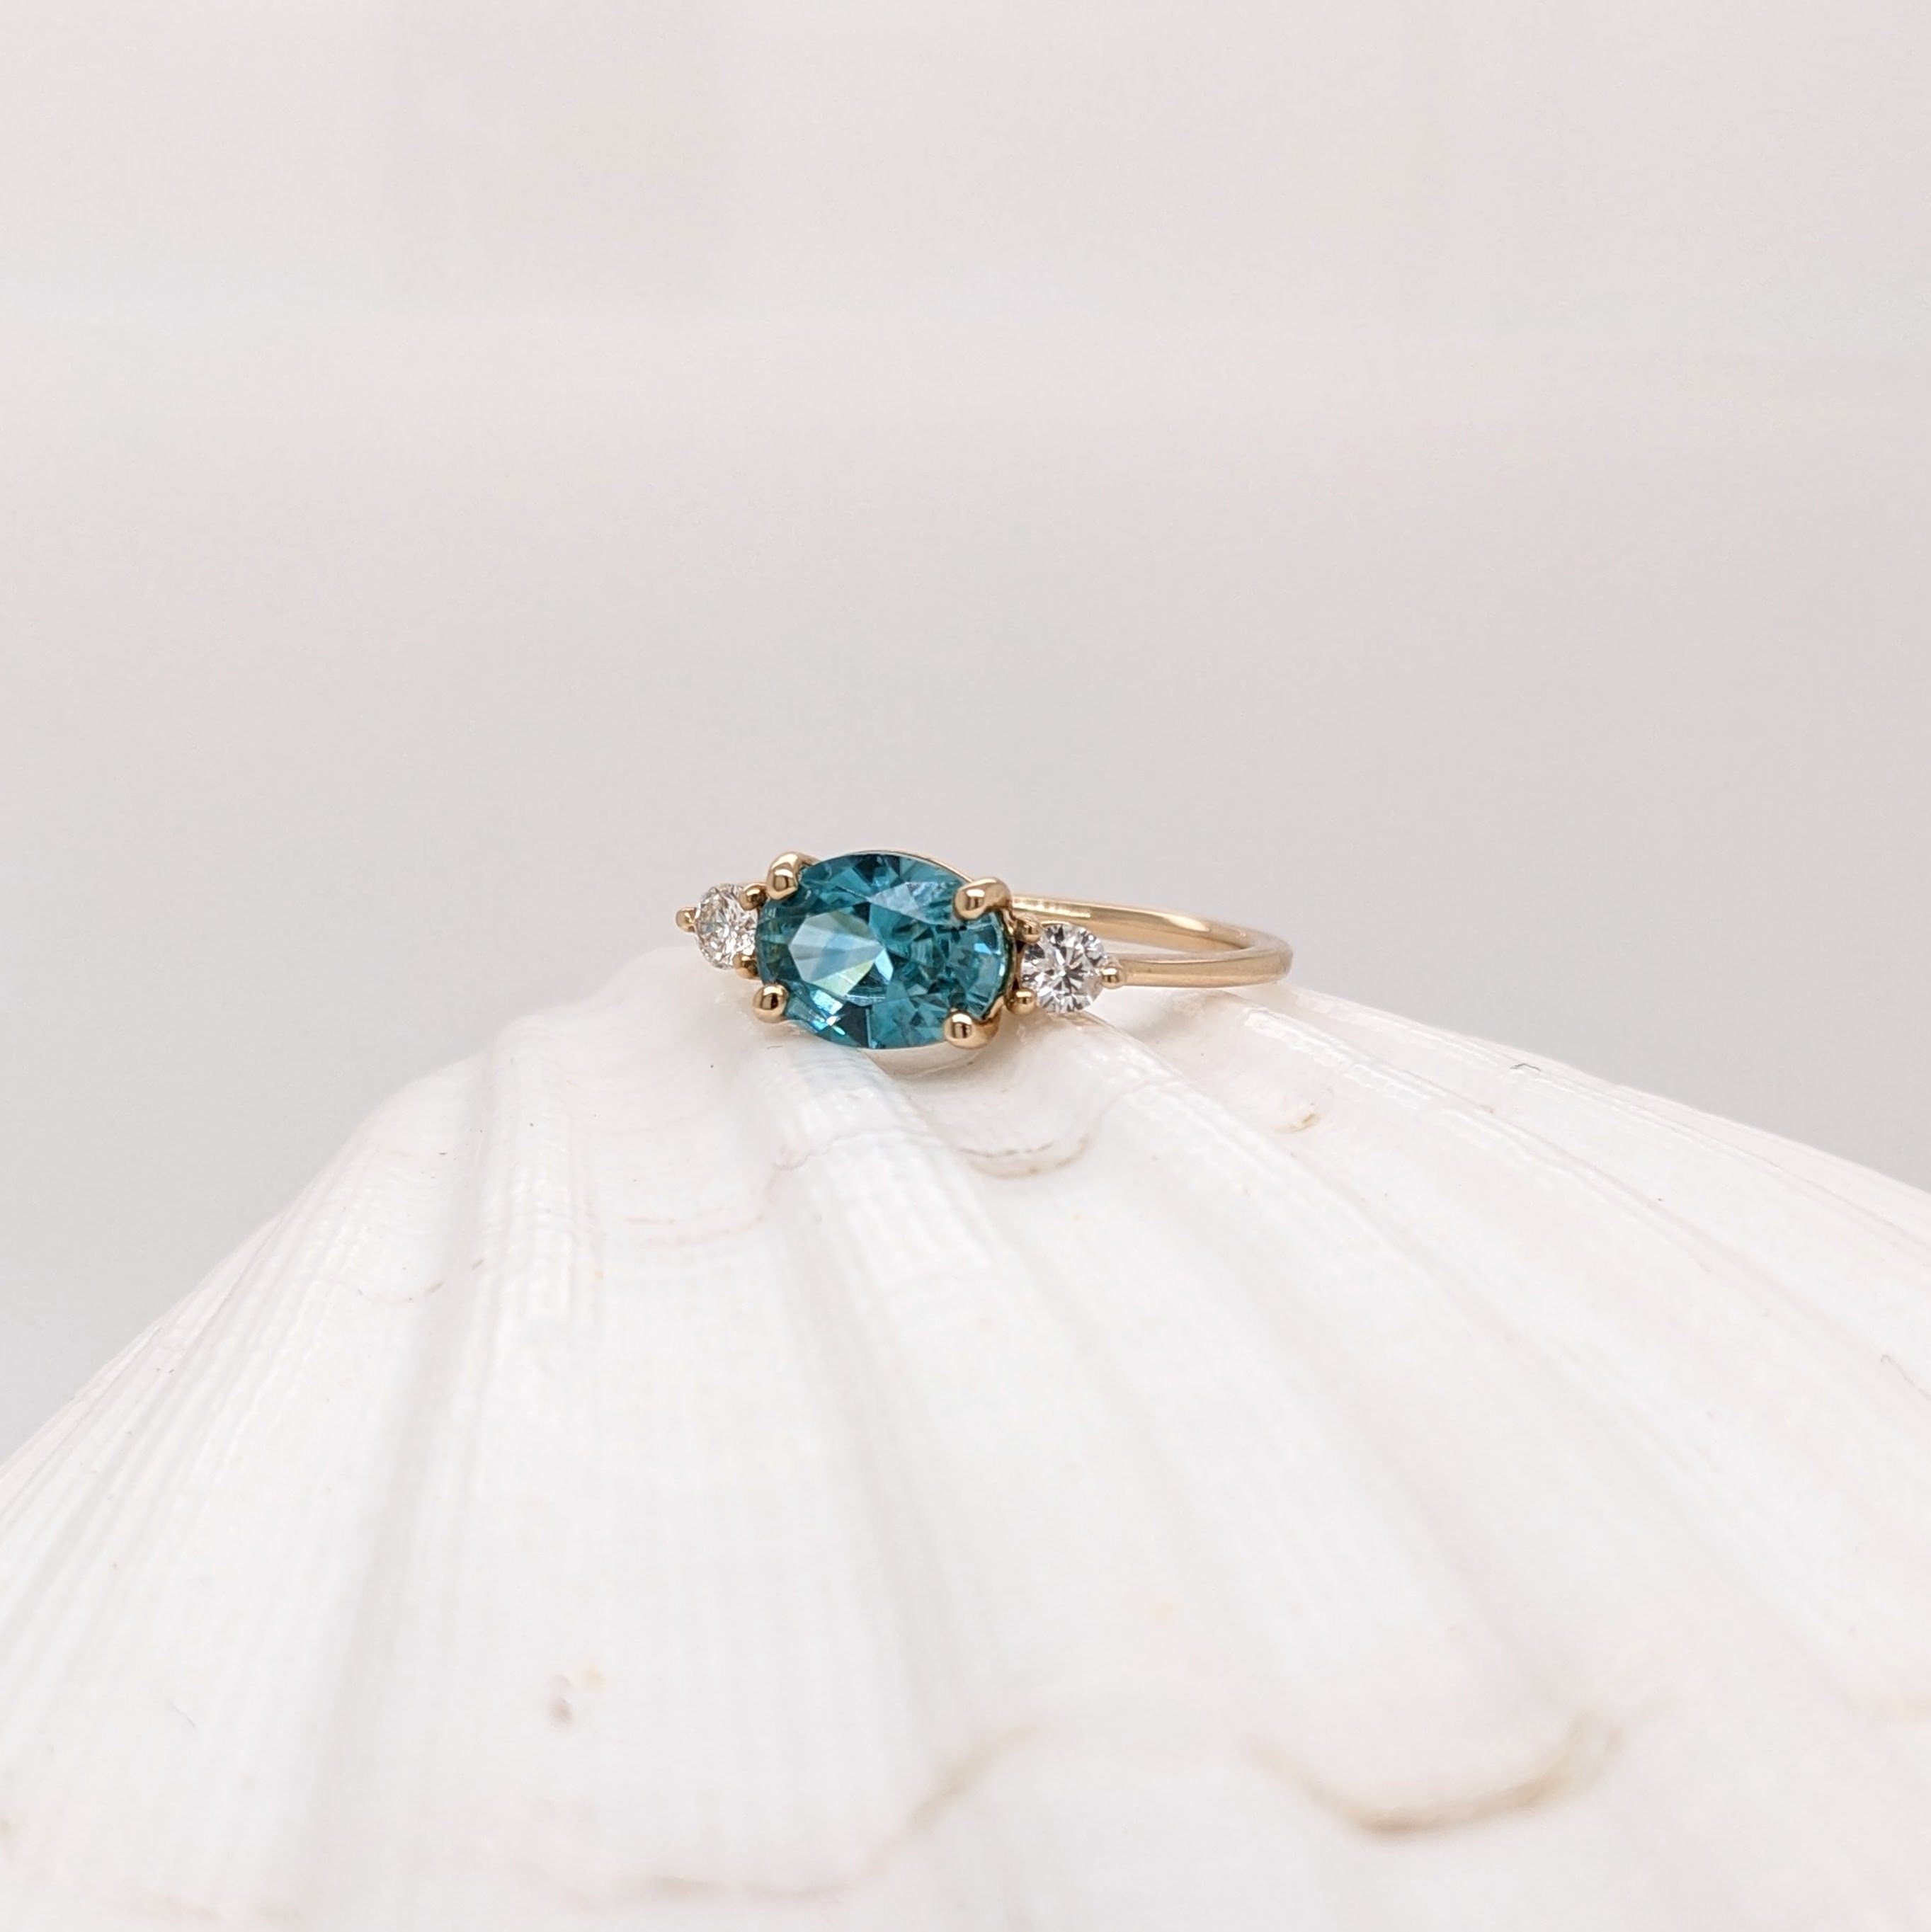 Dainty Oval Cut Blue Zircon Ring in Solid 14K Yellow Gold with Natural Diamond Accents | 8x6mm | December Birthstone | Prongs | Daily Wear |